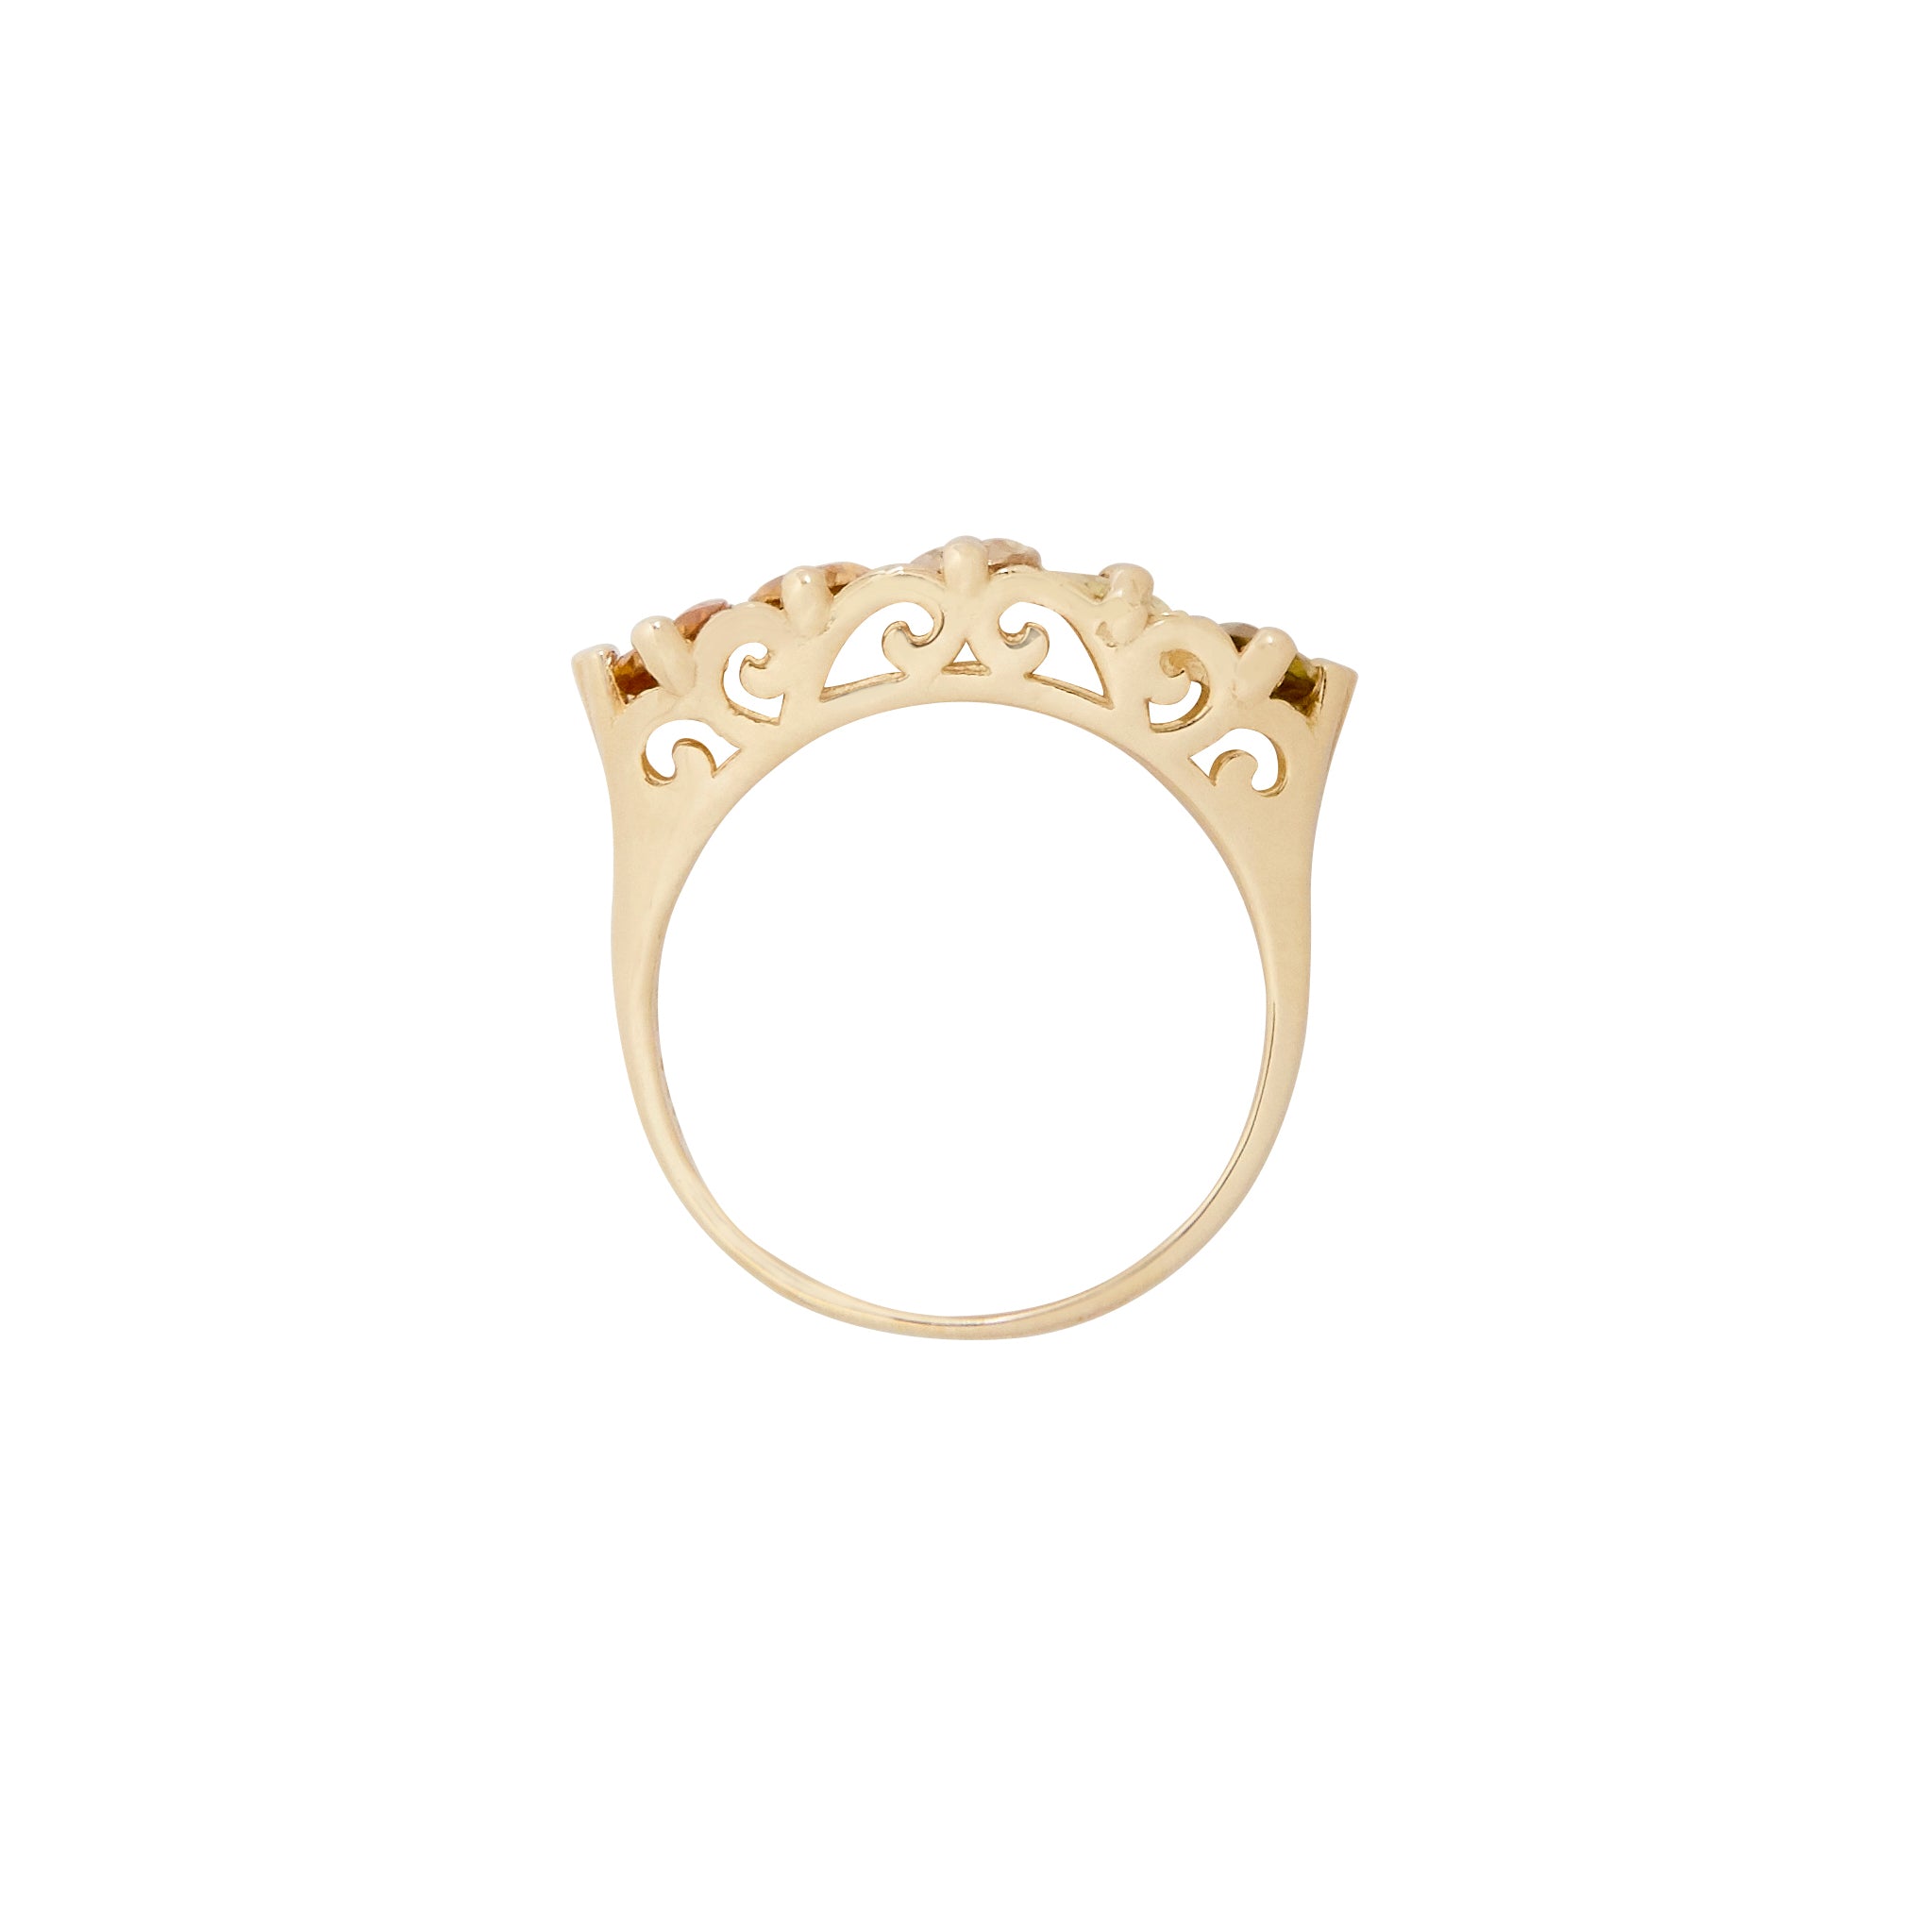 The F&B Ombre Sunrise Ring